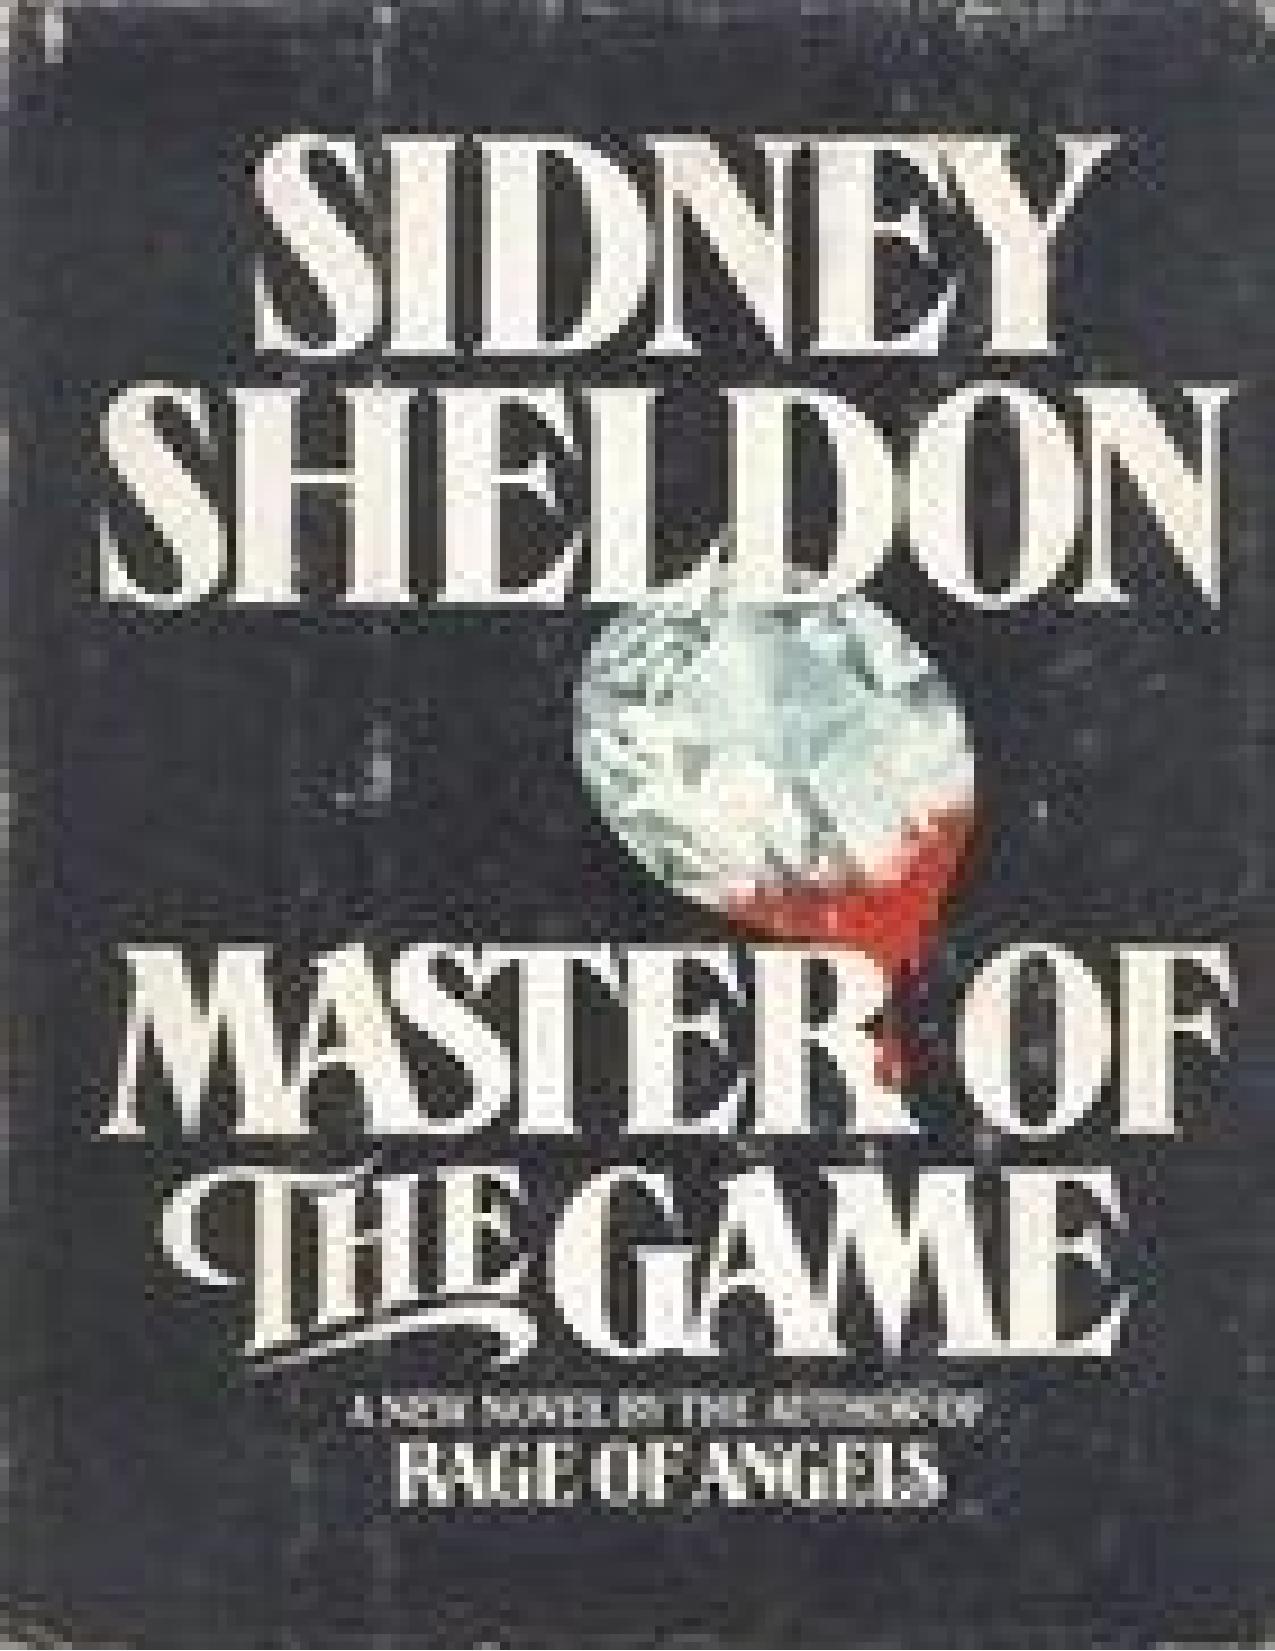 Master of the game by Sidney Sheldon